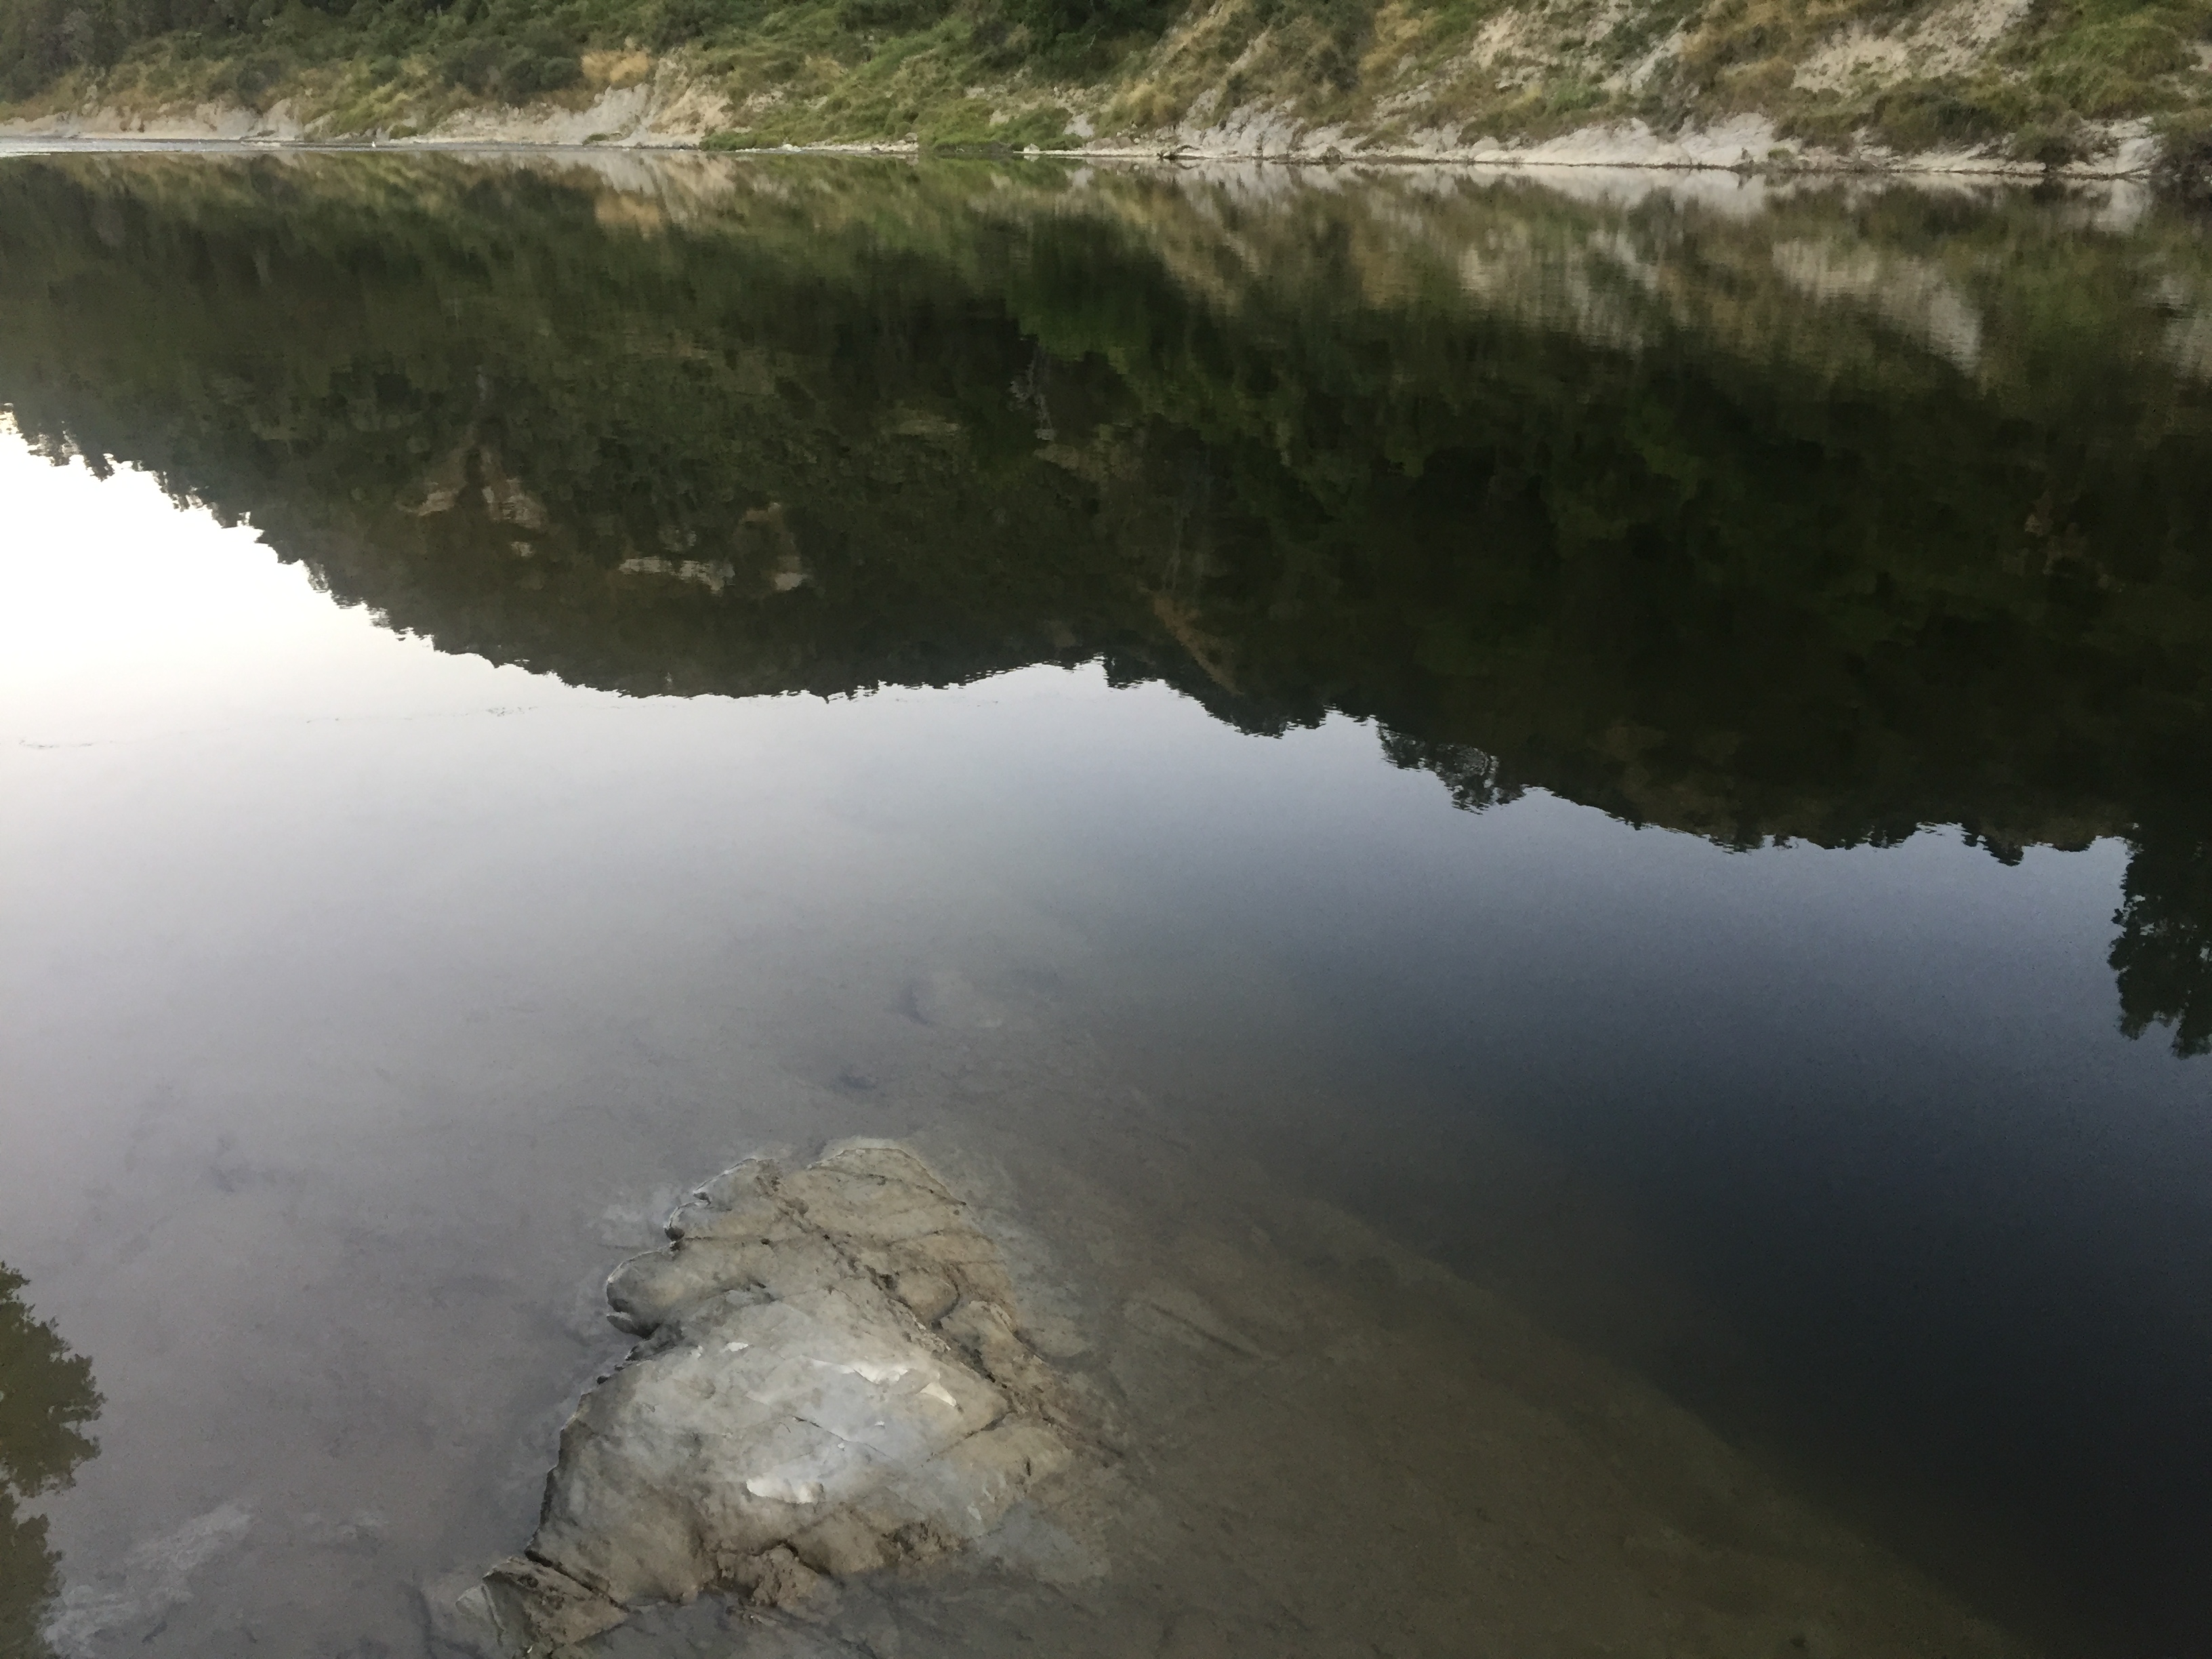 Close-up of water from the Whanganui River, which is reflecting the hills flanking it